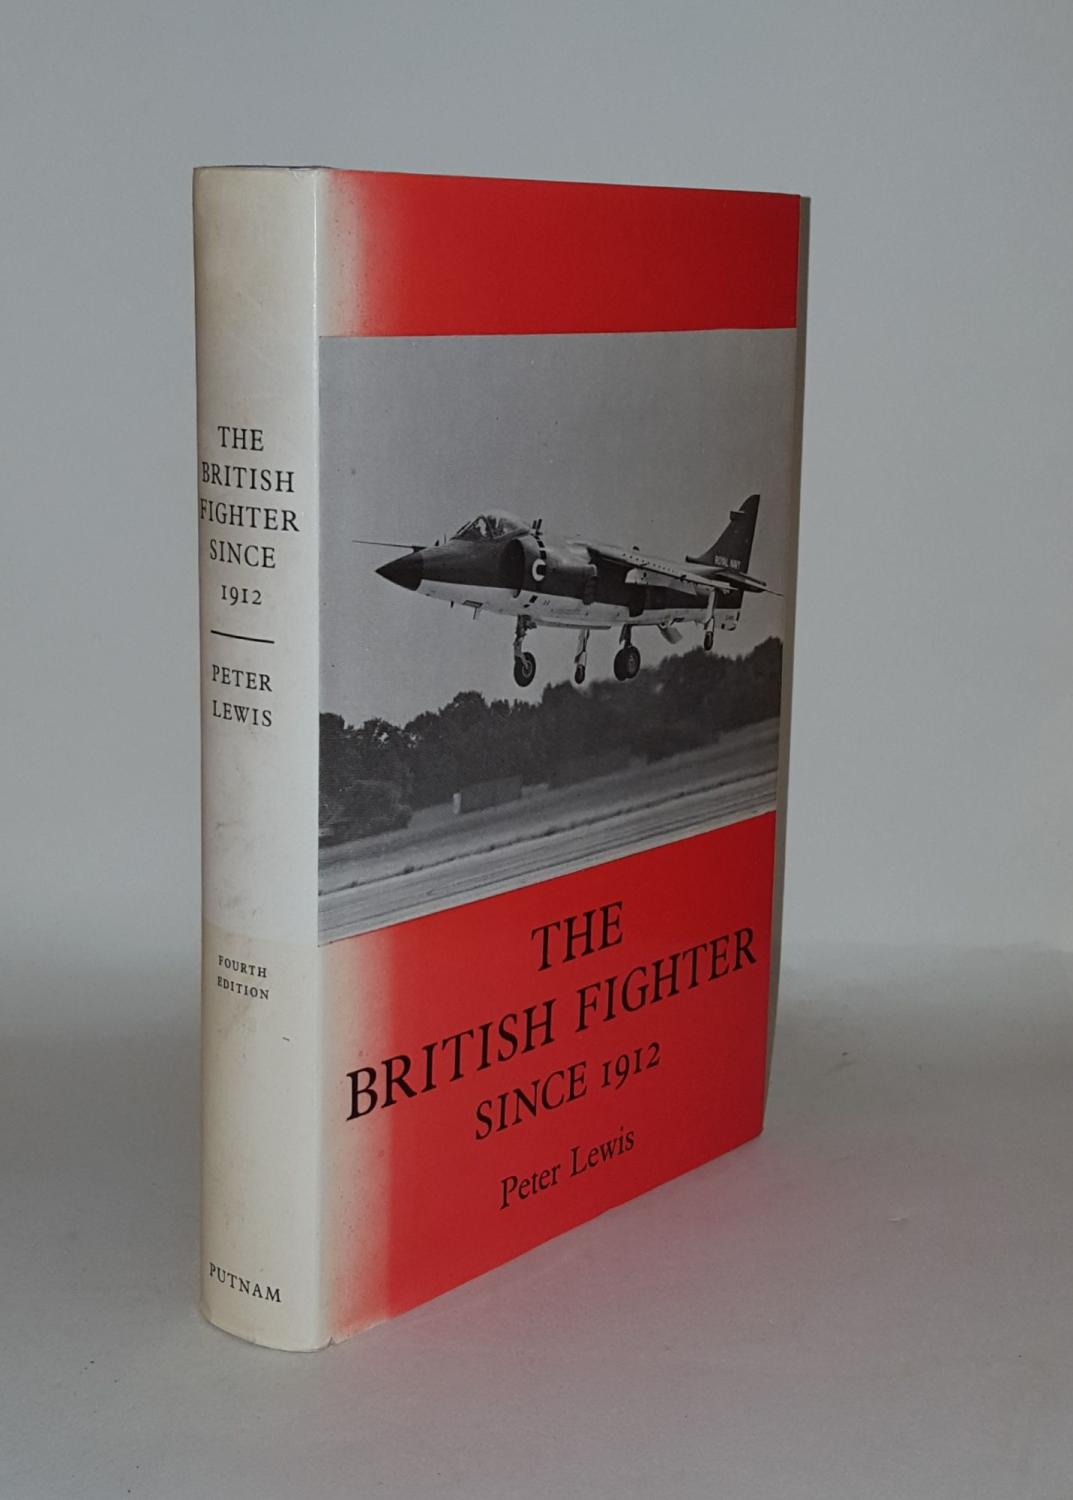 The British Fighter since 1912. Sixty-seven Years of Design and Development.